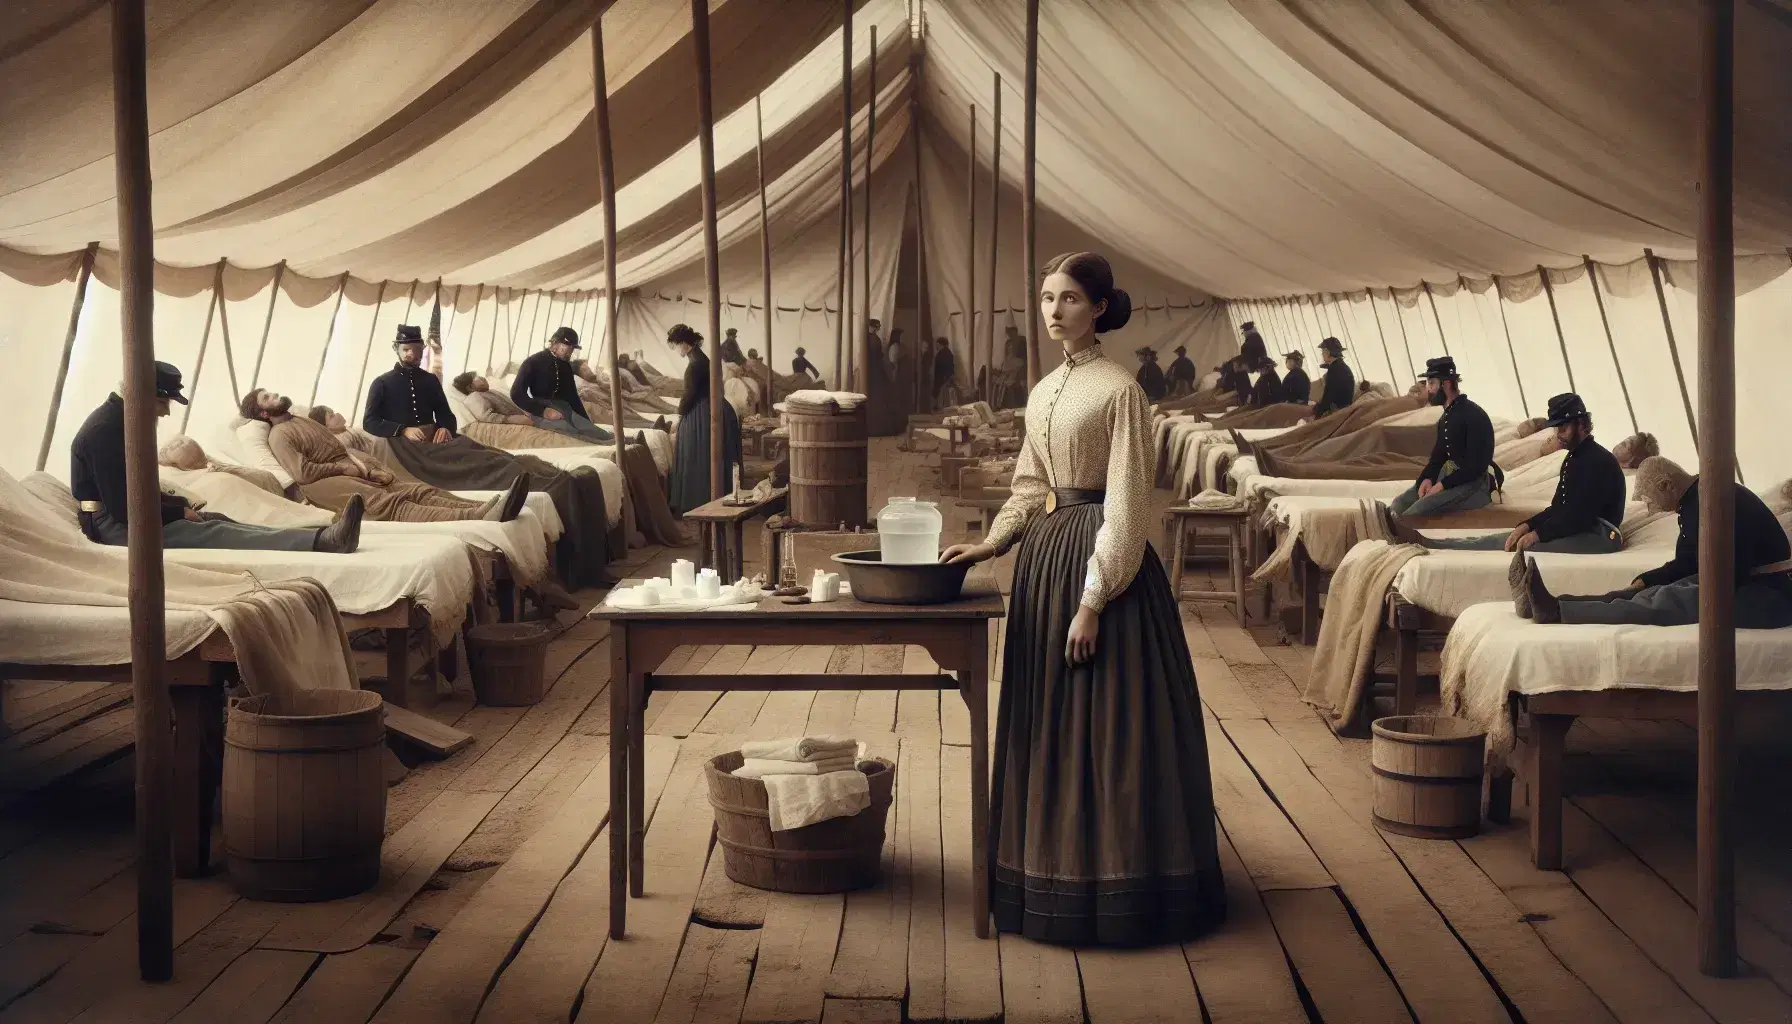 Civil War-era makeshift hospital scene with a woman preparing medical supplies and comforting diverse soldiers resting on cots.